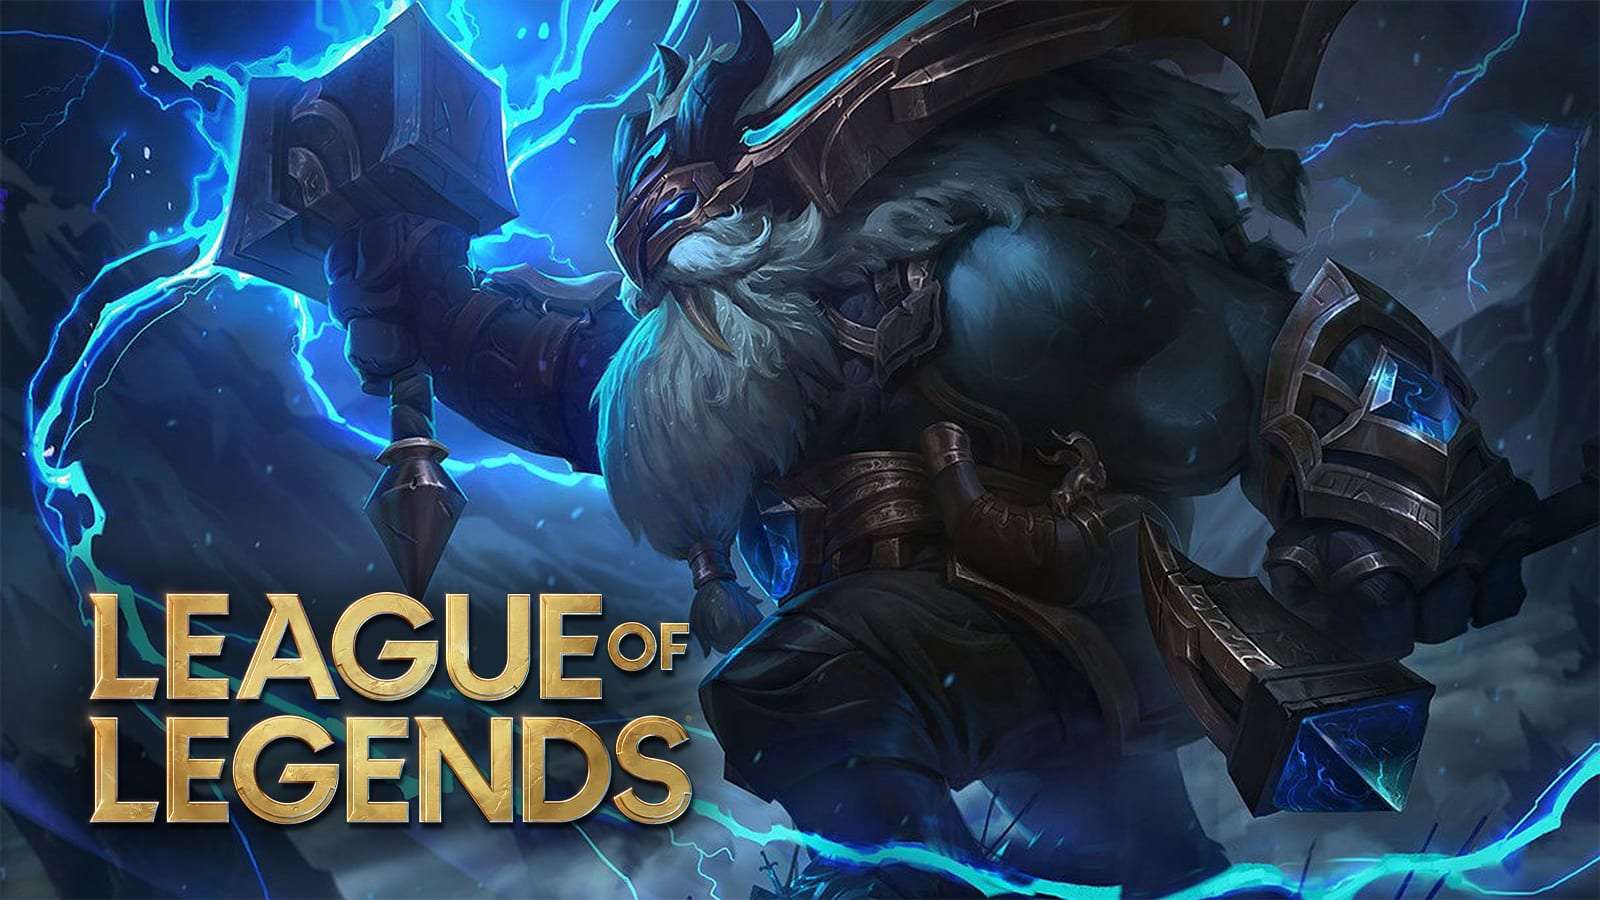 Thunderlord Ornn in League of Legends